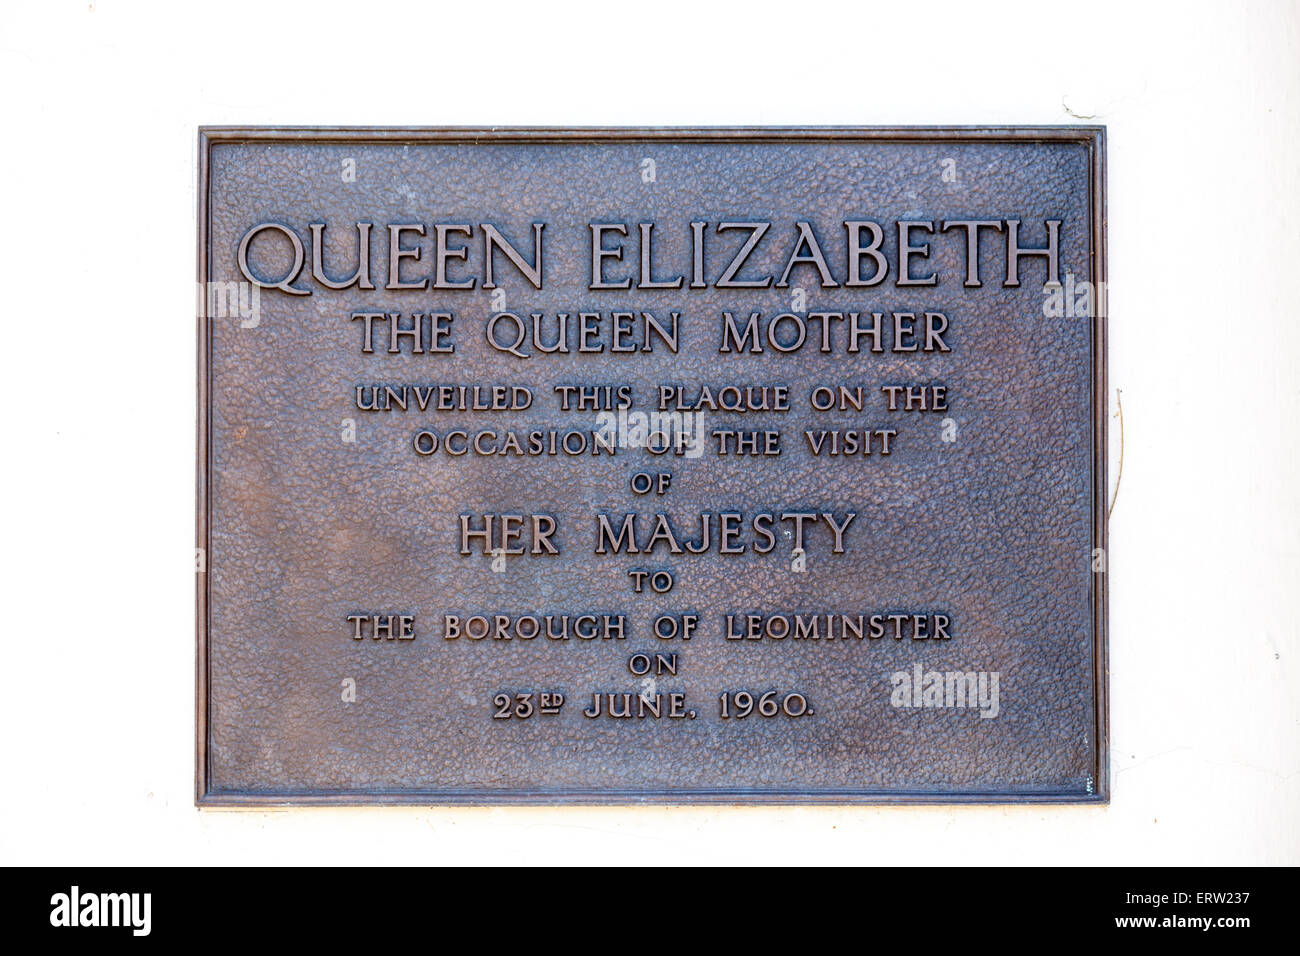 Plaque commemorating the visit of The Queen Mother to Leominster, located at Grange Court, Leominster, Herefordshire Stock Photo